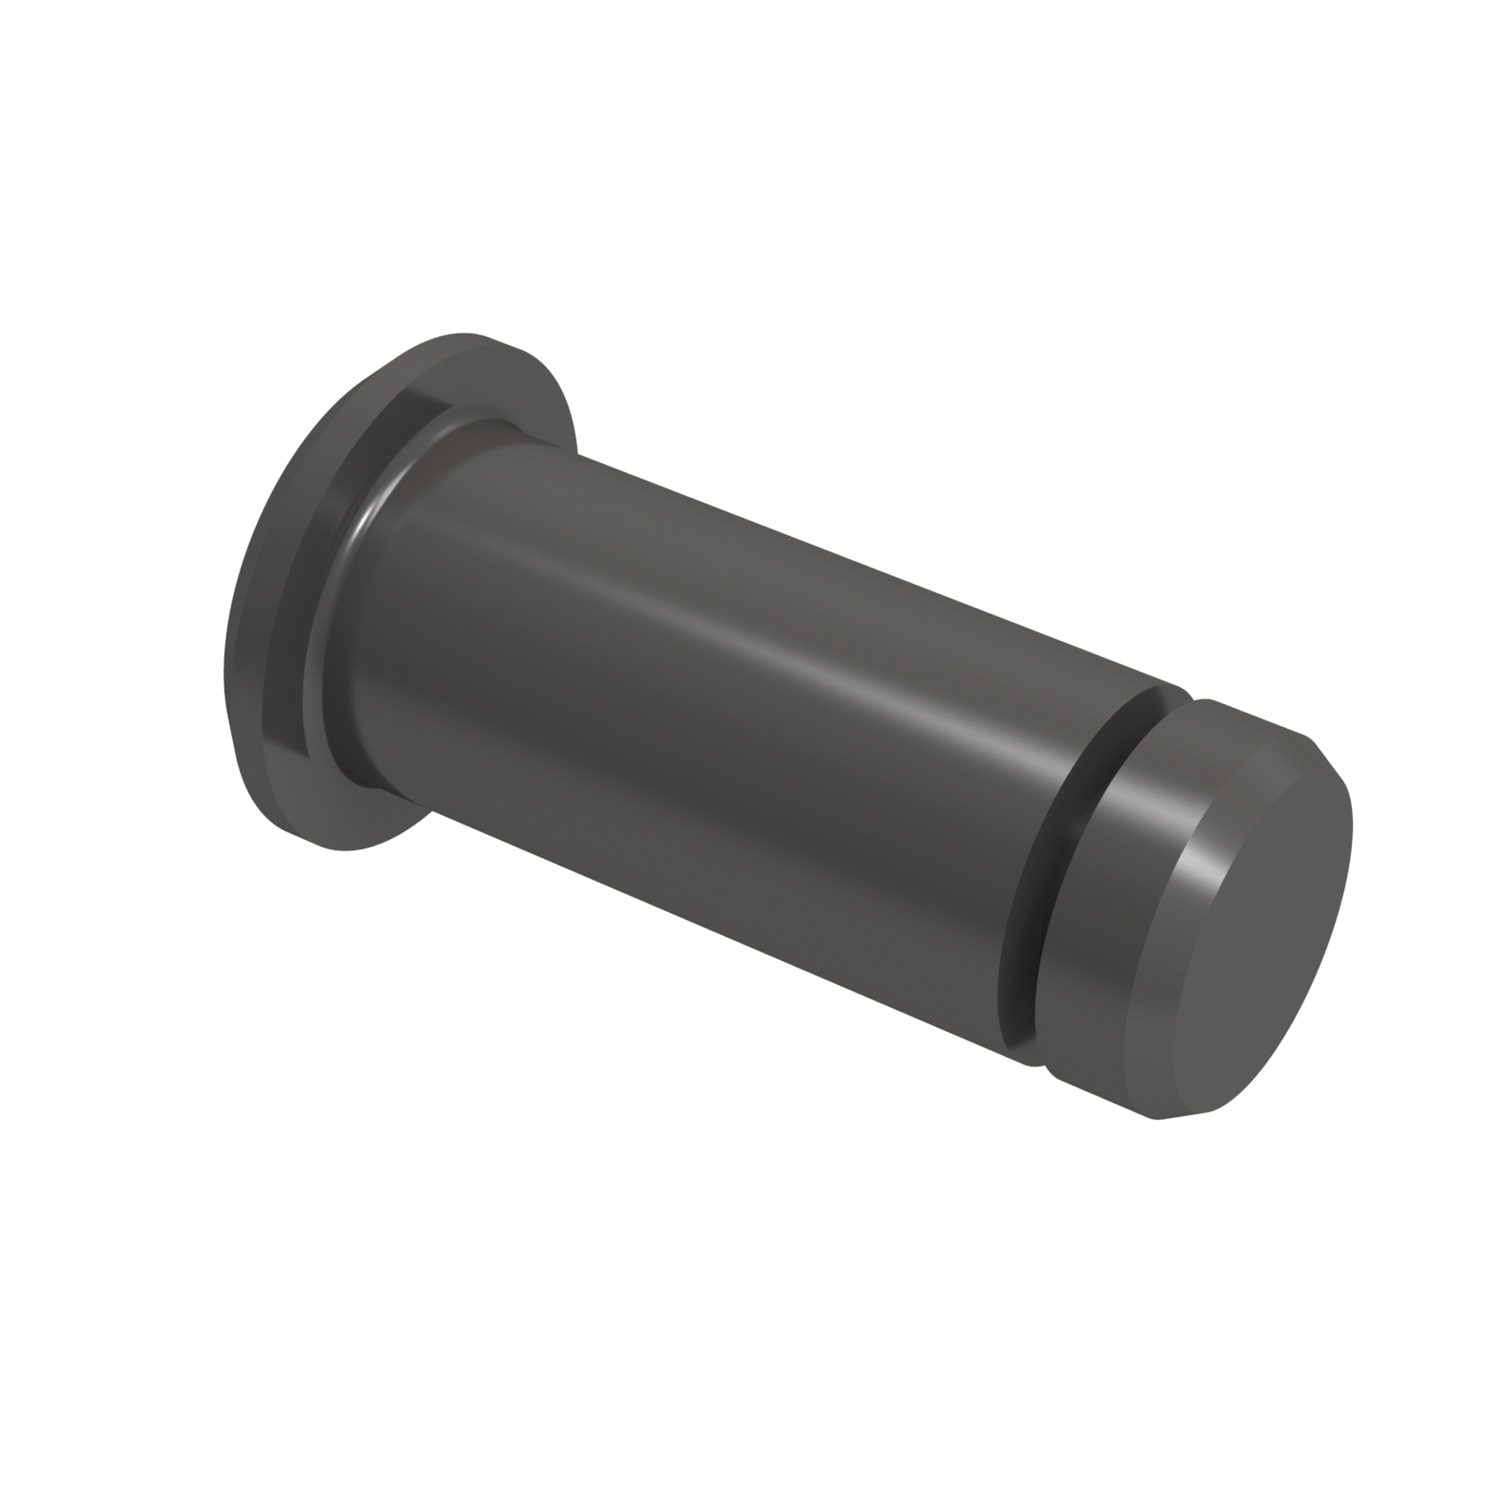 Product R3453, Plastic Clevis Pin  / 